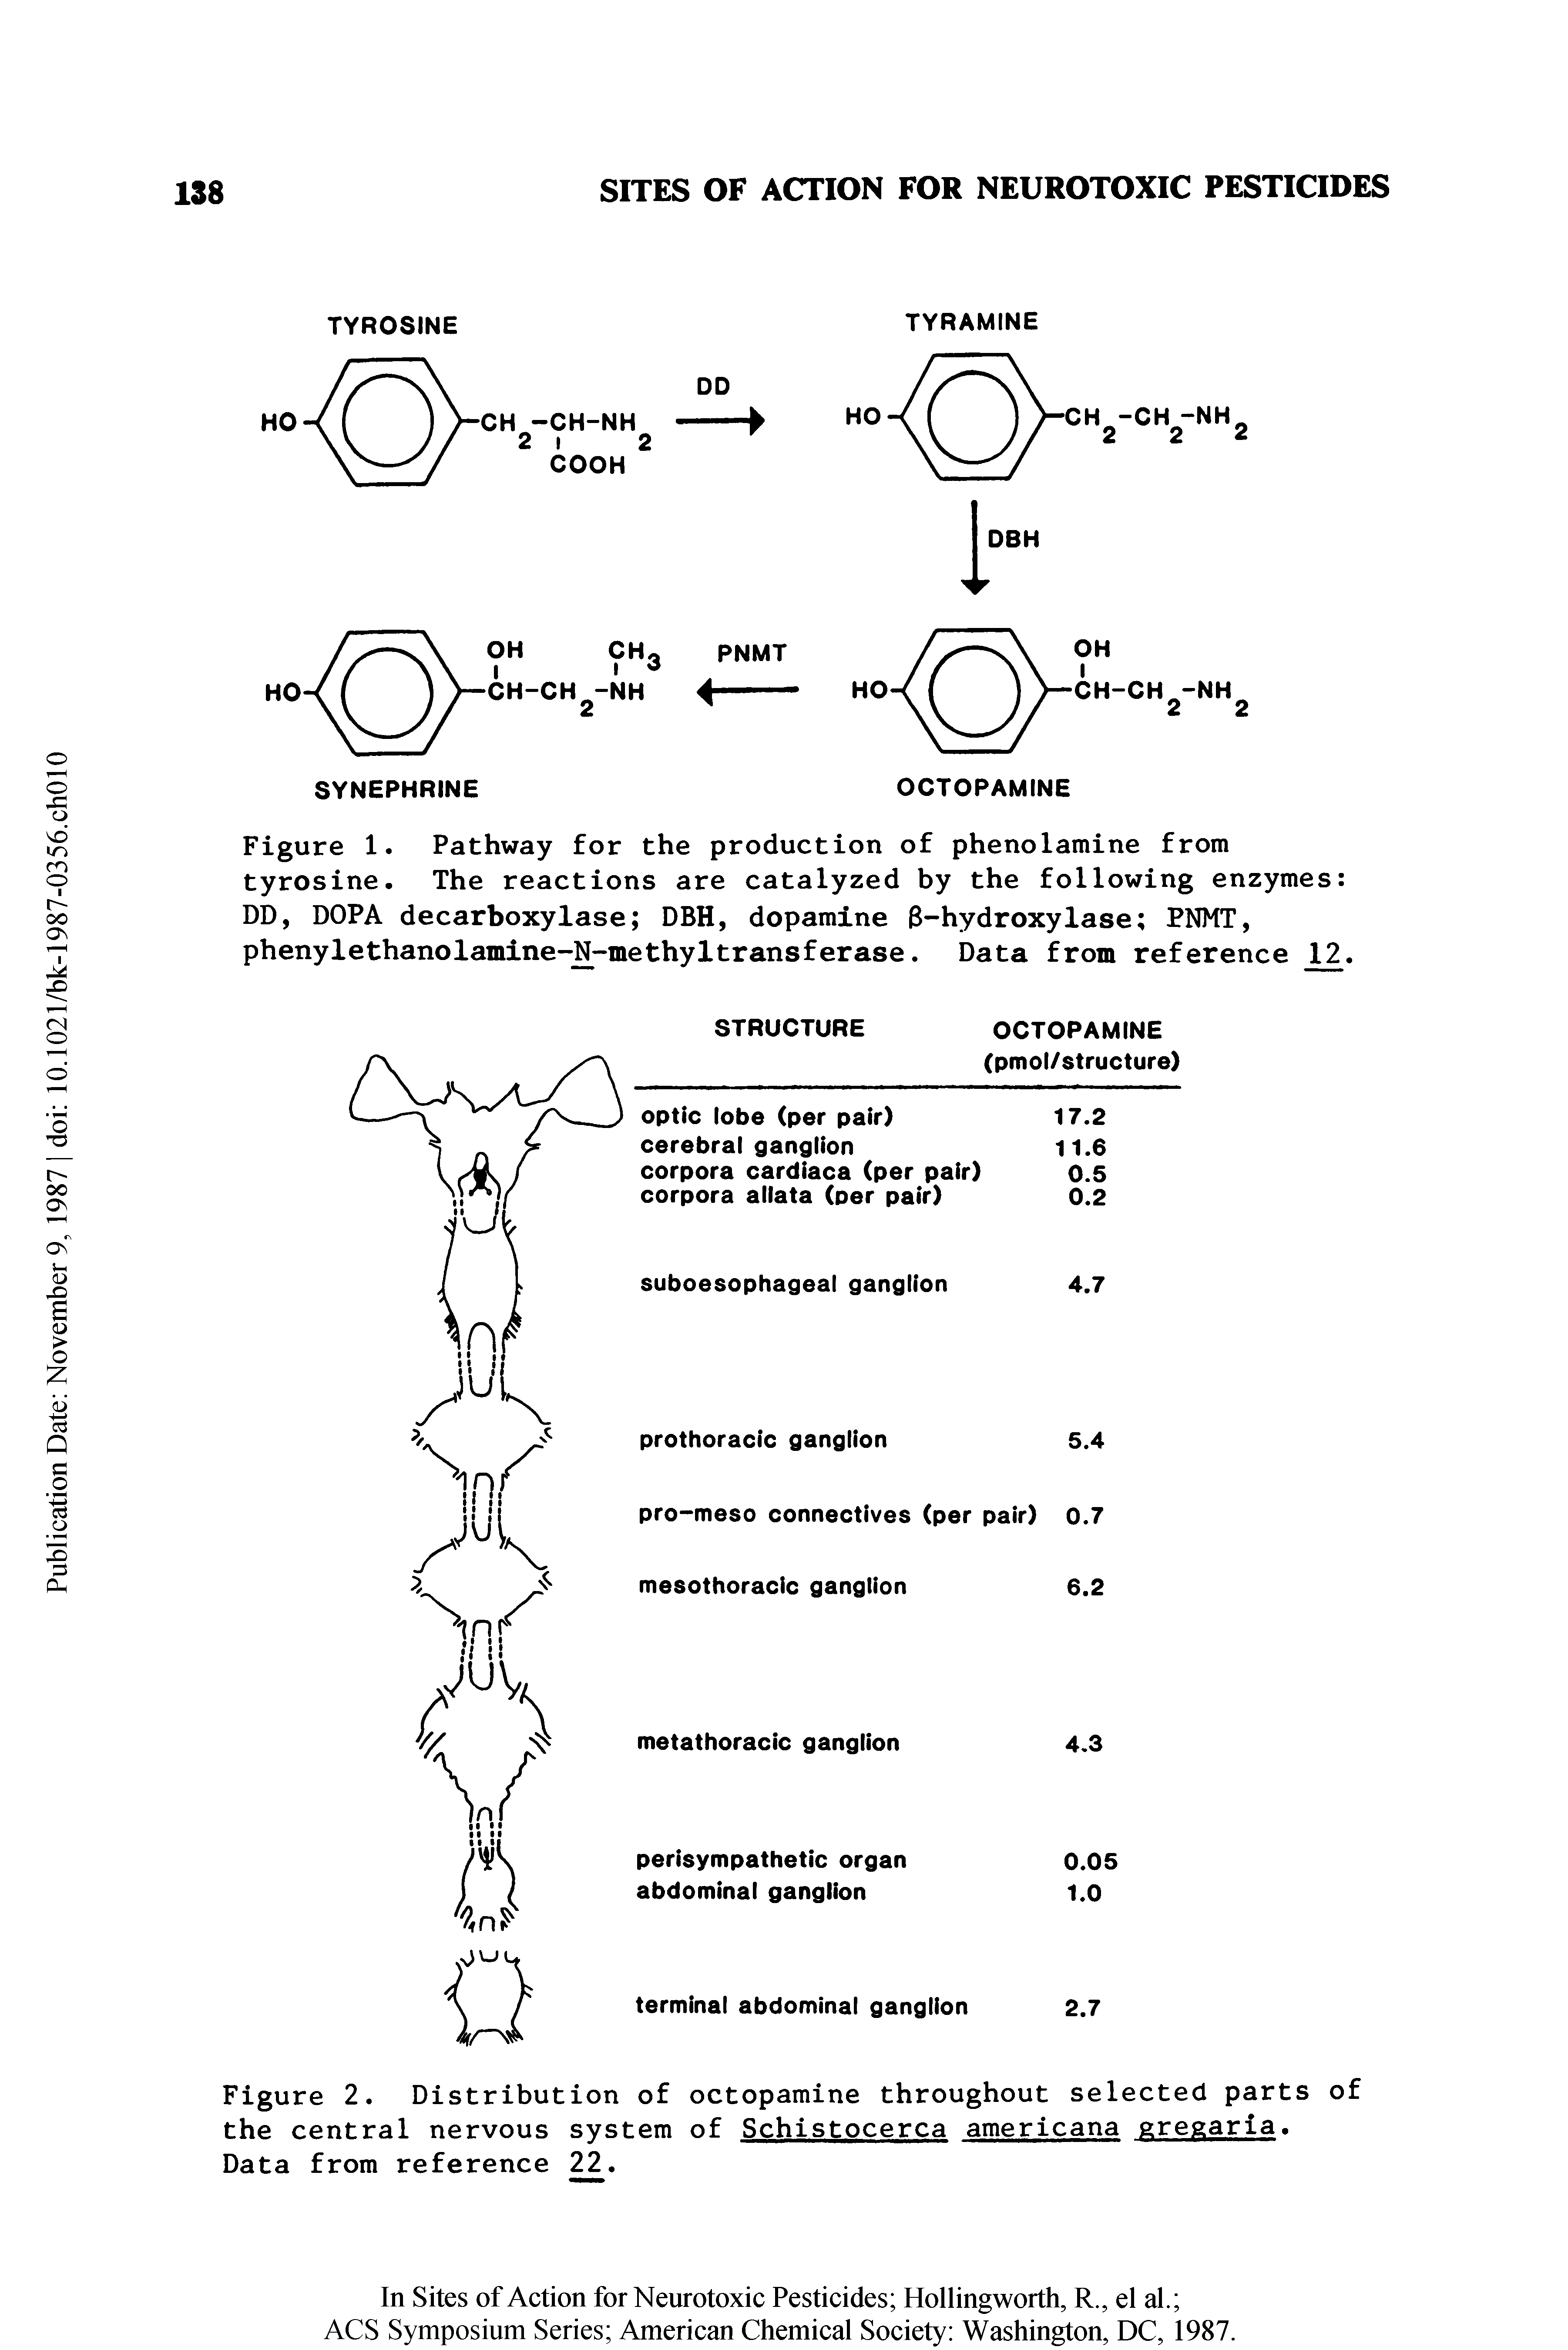 Figure 1. Pathway for the production of phenolamine from tyrosine. The reactions are catalyzed by the following enzymes DD, DOPA decarboxylase DBH, dopamine 8-hydroxylase PNMT, phenylethanolamine-N-methyltransferase. Data from reference 12.